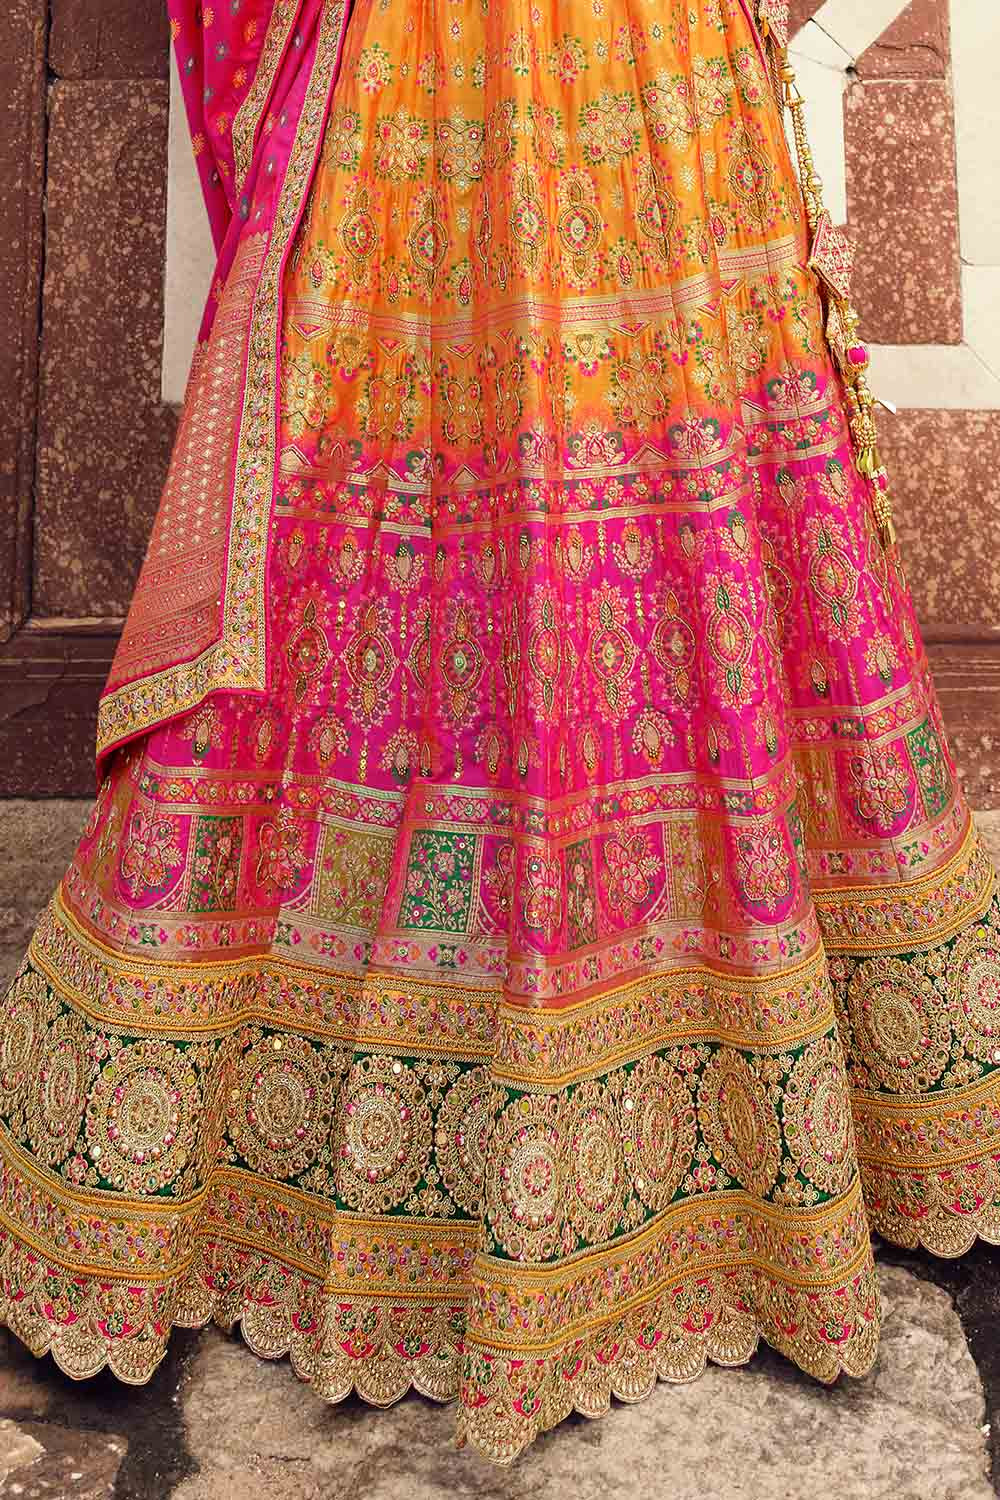 Amazing Silk Embroidered Semi Stitched Lehenga Choli – Beige | 9gmart Most  Popular American Fashion Brands, Mobiles, Smartphones, Smart TV, Laptops,  Smart Watches and Luxury Fashion Offers, Deals, Discounts, Coupons at 9gmart